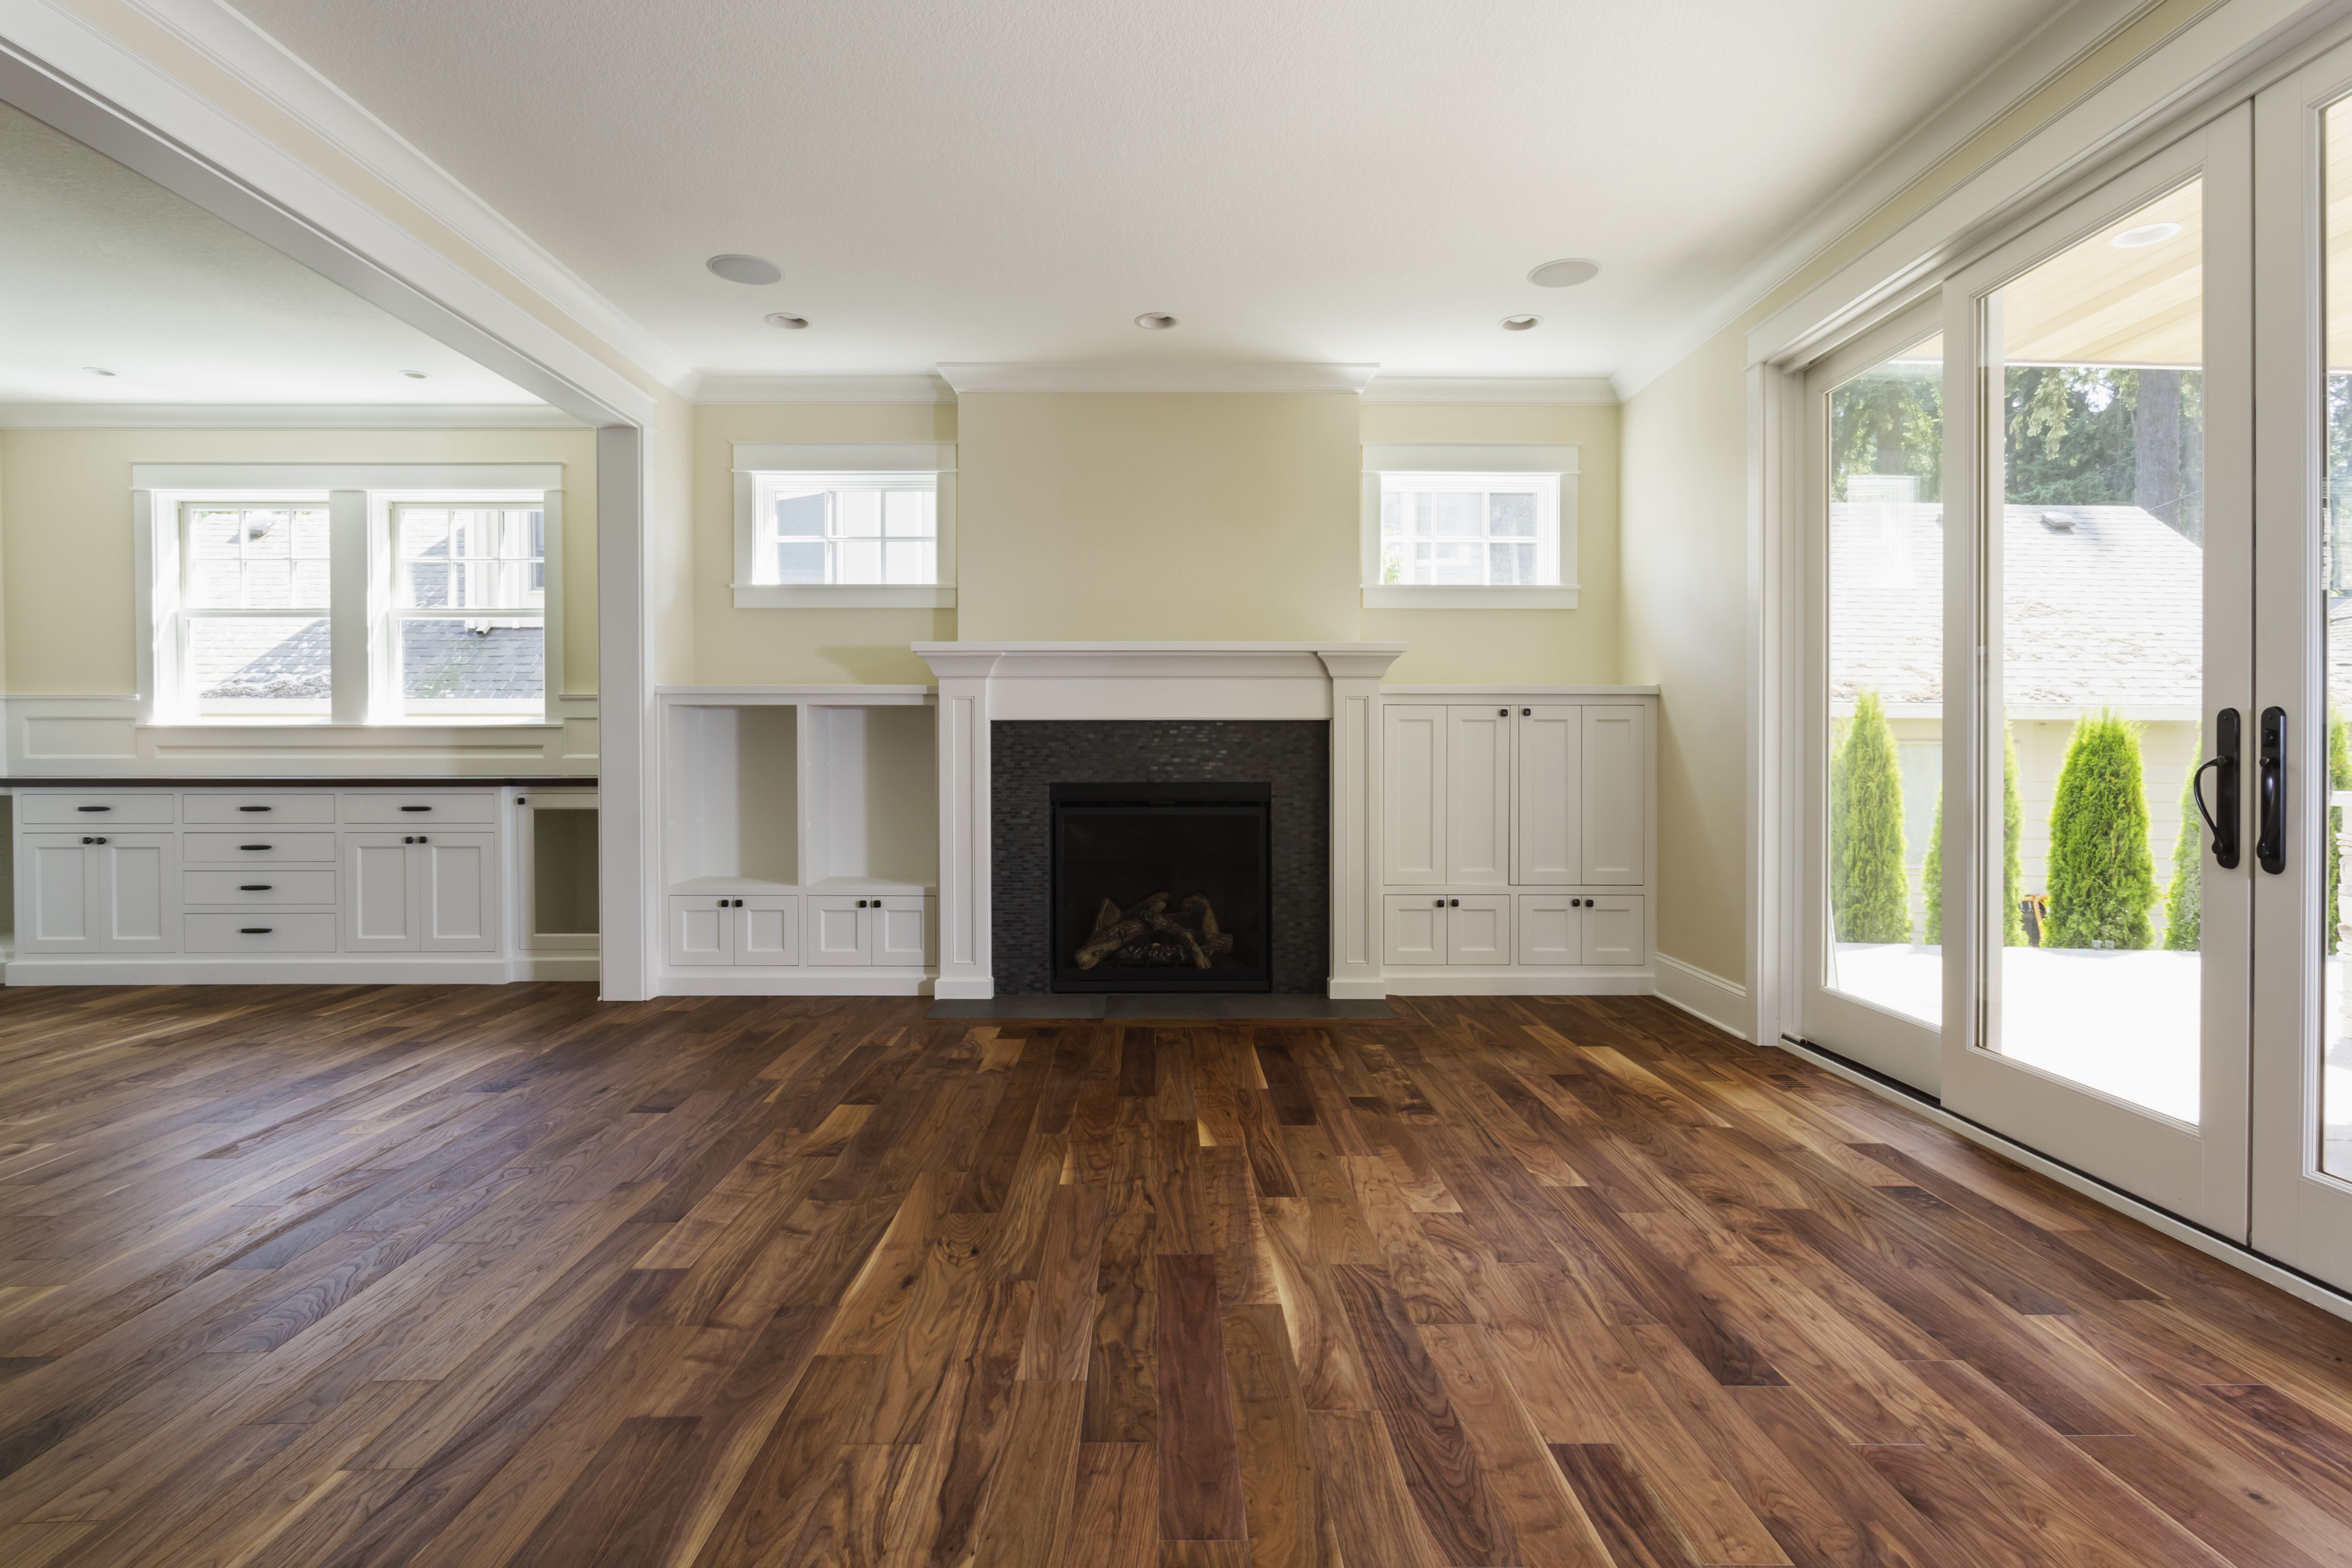 best waterproof hardwood flooring of the pros and cons of prefinished hardwood flooring with regard to fireplace and built in shelves in living room 57bef8e33df78cc16e